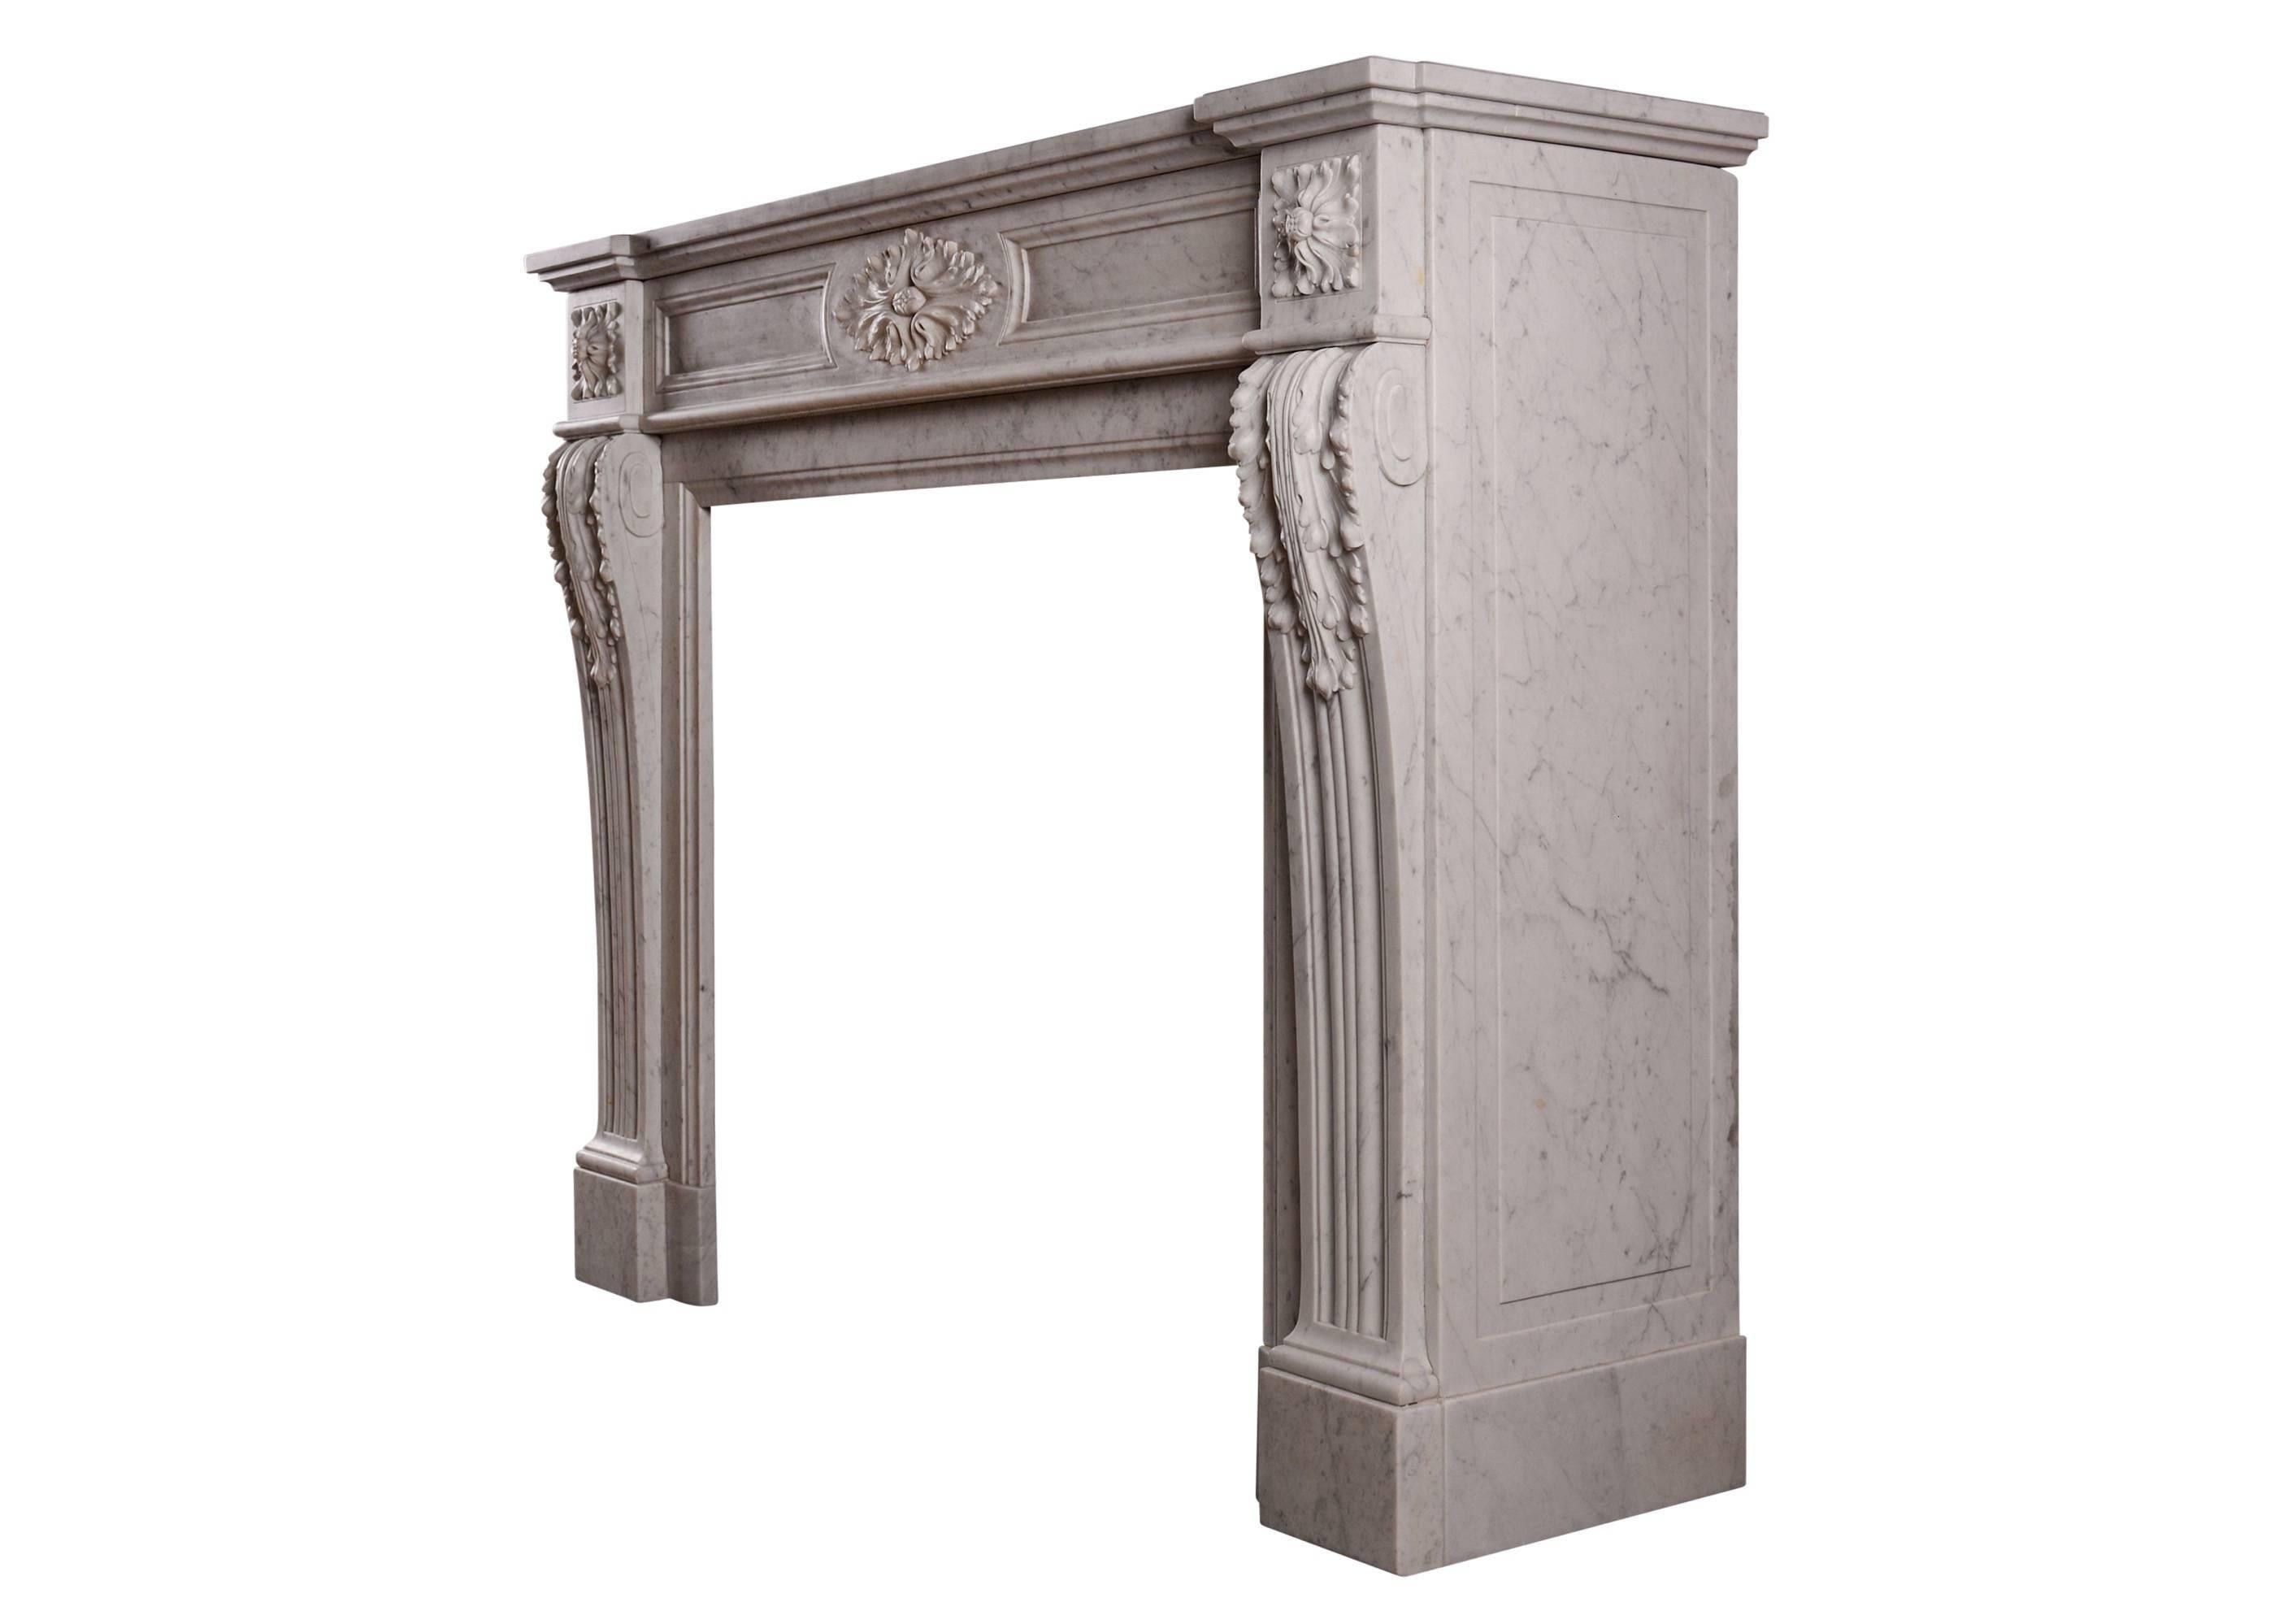 A French Louis XVI style fireplace in Carrara marble. The moulded jambs with acanthus leaves and scrolled returns, the frieze with carved oval paterae, moulded panels and square paterae to side blockings. Breakfront shelf, 19th century. Smaller